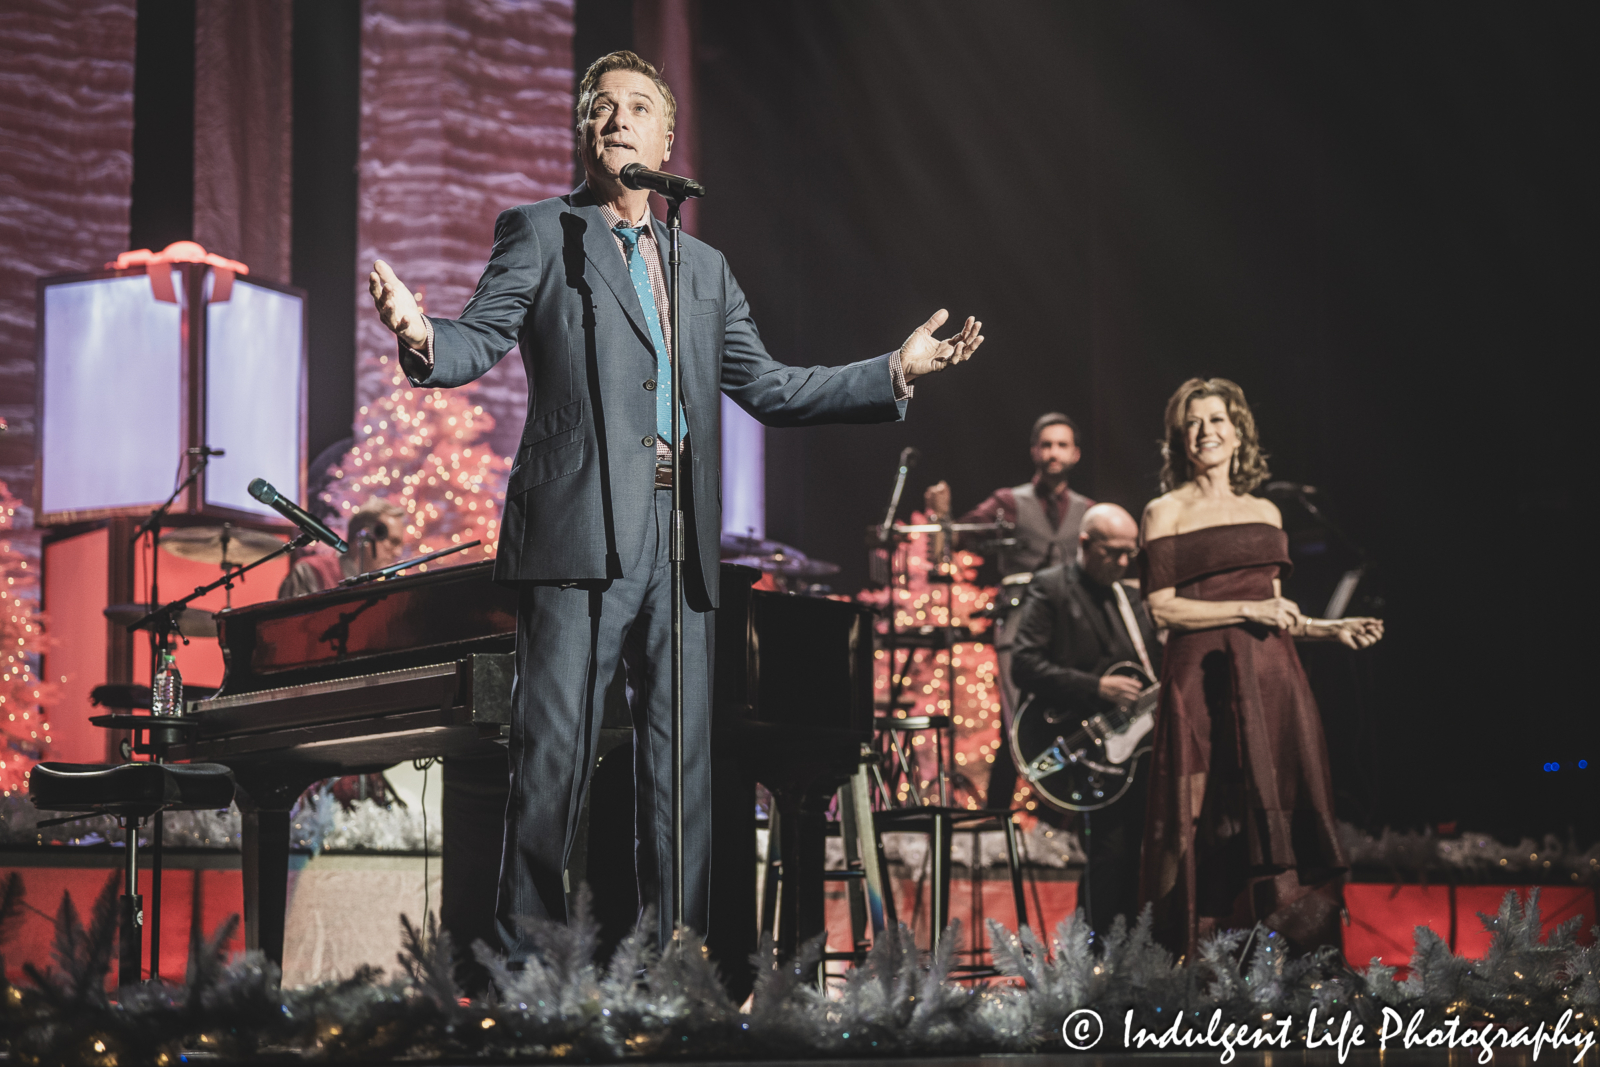 Michael W. Smith and Amy Grant performing live together during their Christmas concert at Music Hall in downtown Kansa City, MO on November 30, 2023.